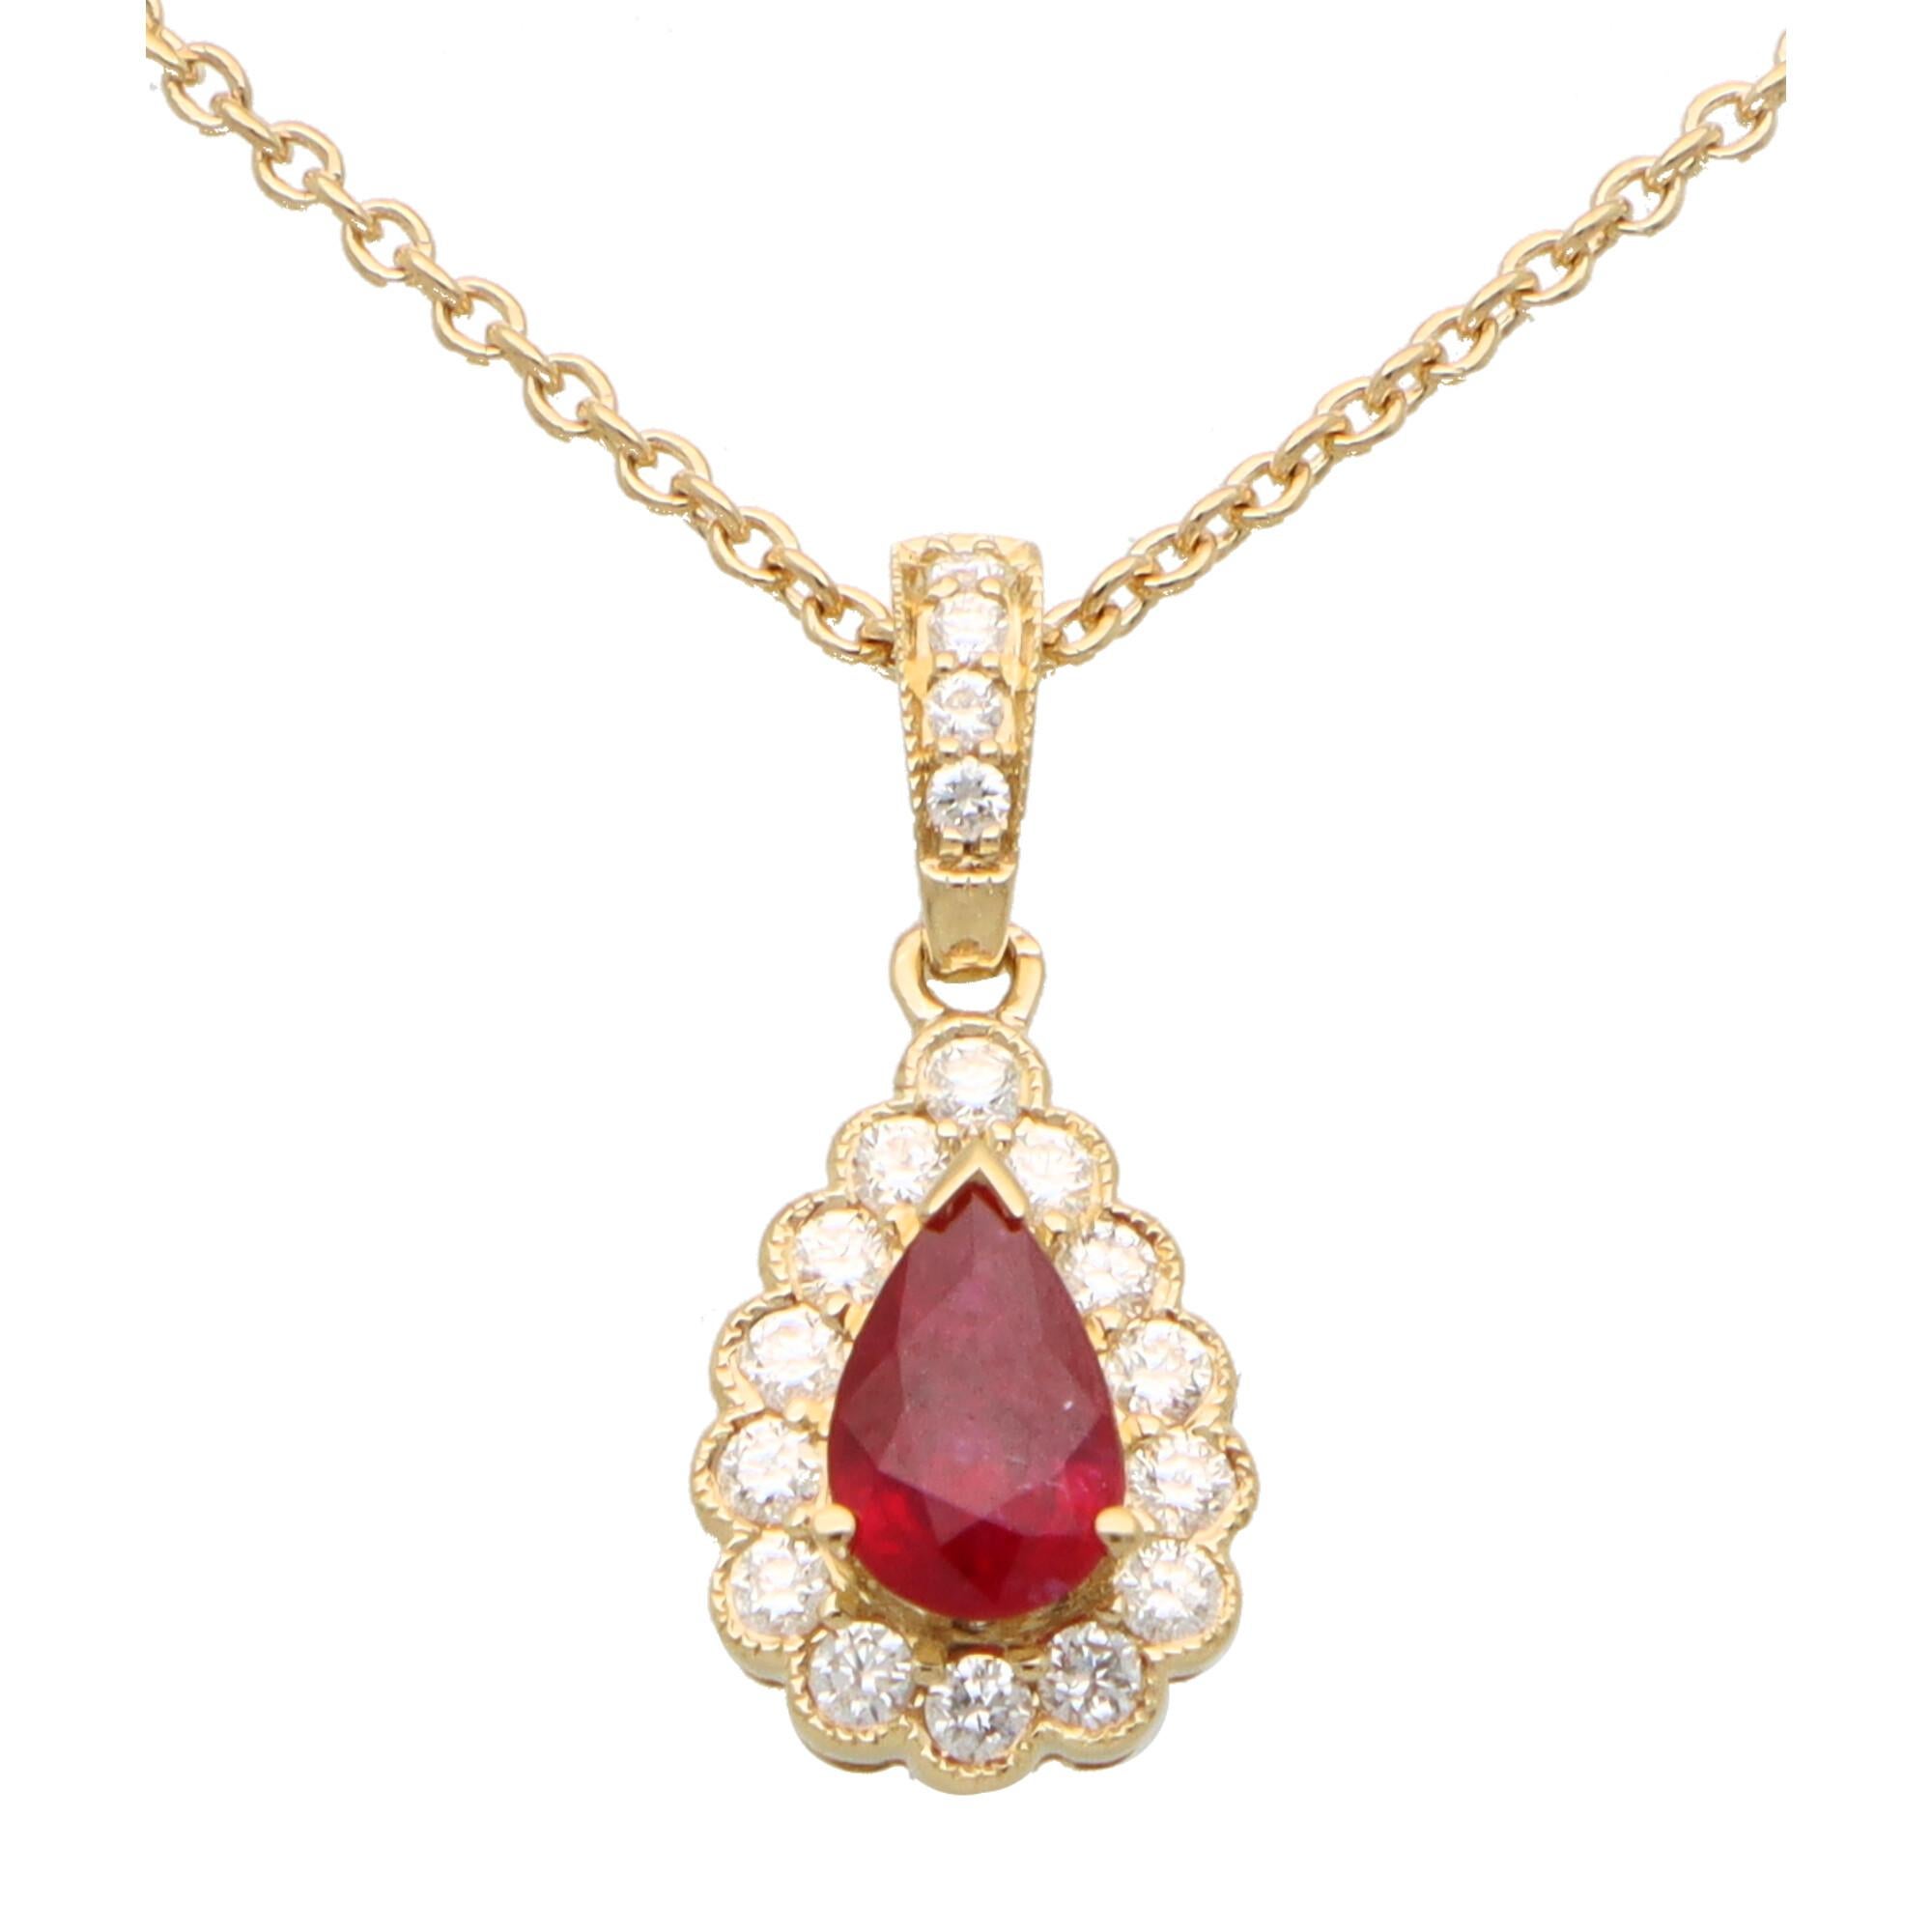  A beautiful little ruby and diamond cluster pendant set in 18k yellow gold.

The pendant is centrally set with a beautiful colored red pear cut ruby which is surrounded by 14 sparkly round brilliant cut diamonds. The pendant hangs from a diamond